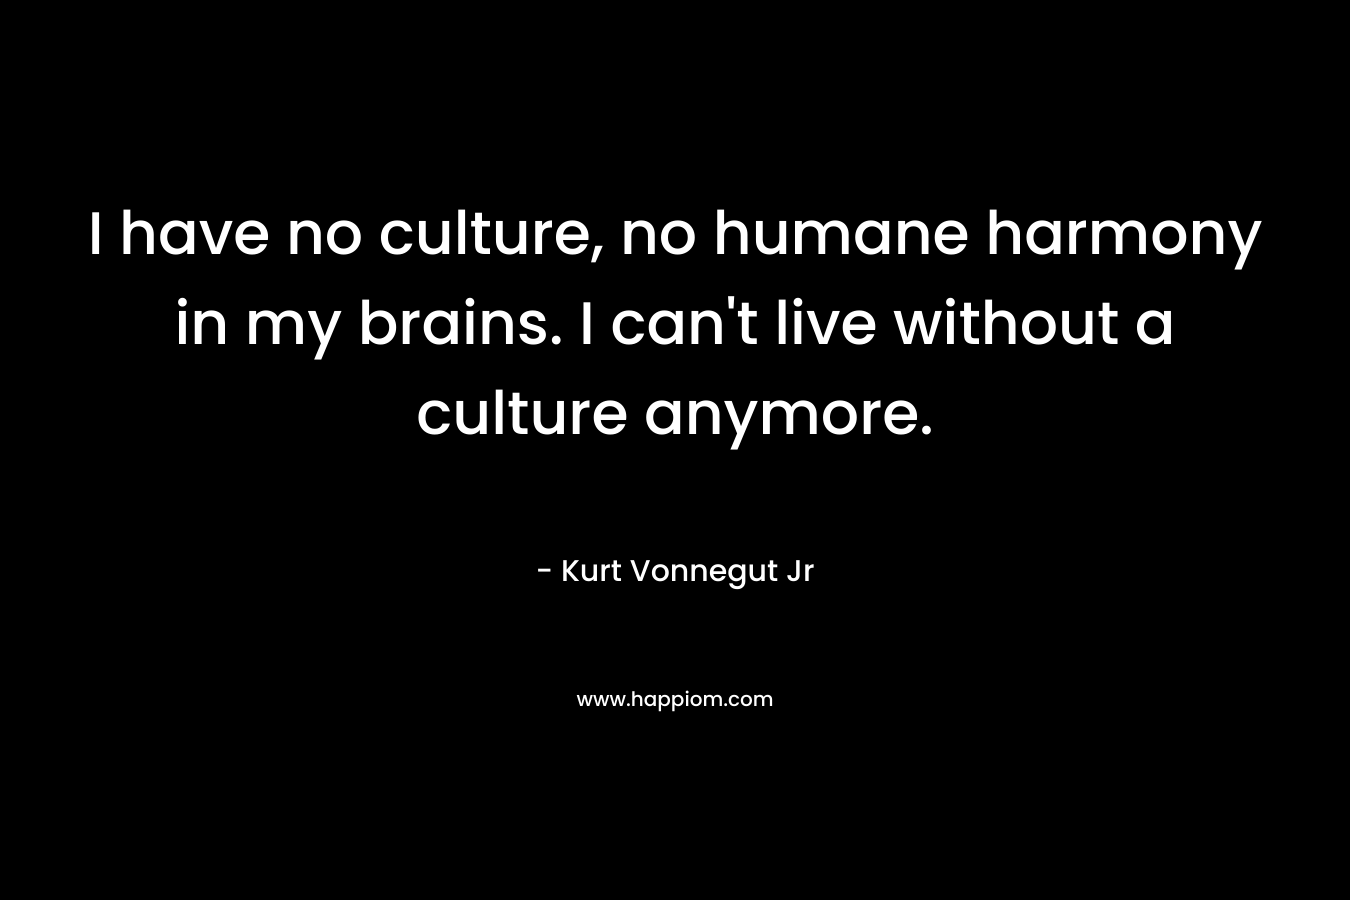 I have no culture, no humane harmony in my brains. I can't live without a culture anymore.